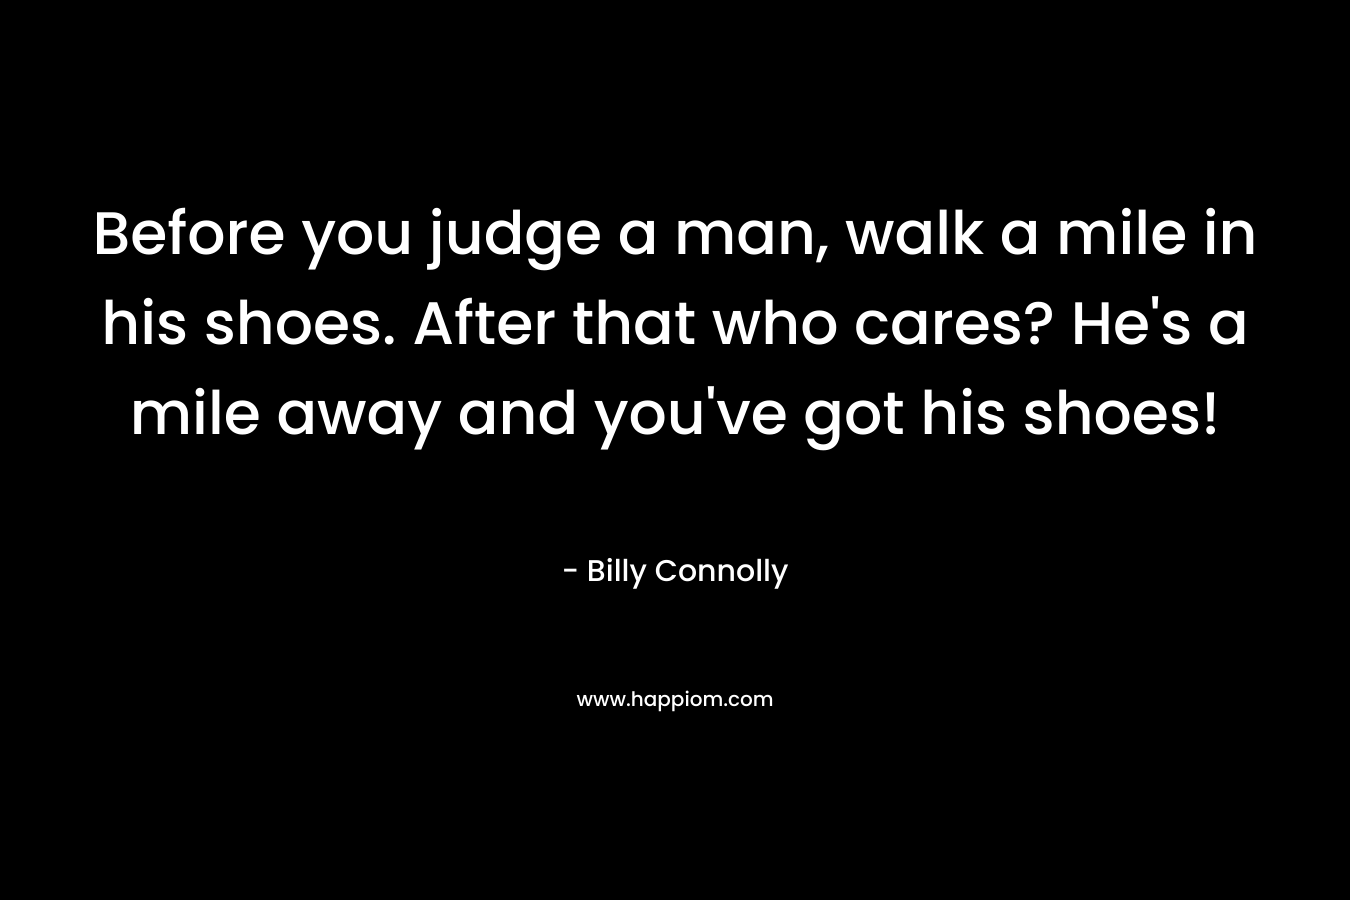 Before you judge a man, walk a mile in his shoes. After that who cares? He's a mile away and you've got his shoes!